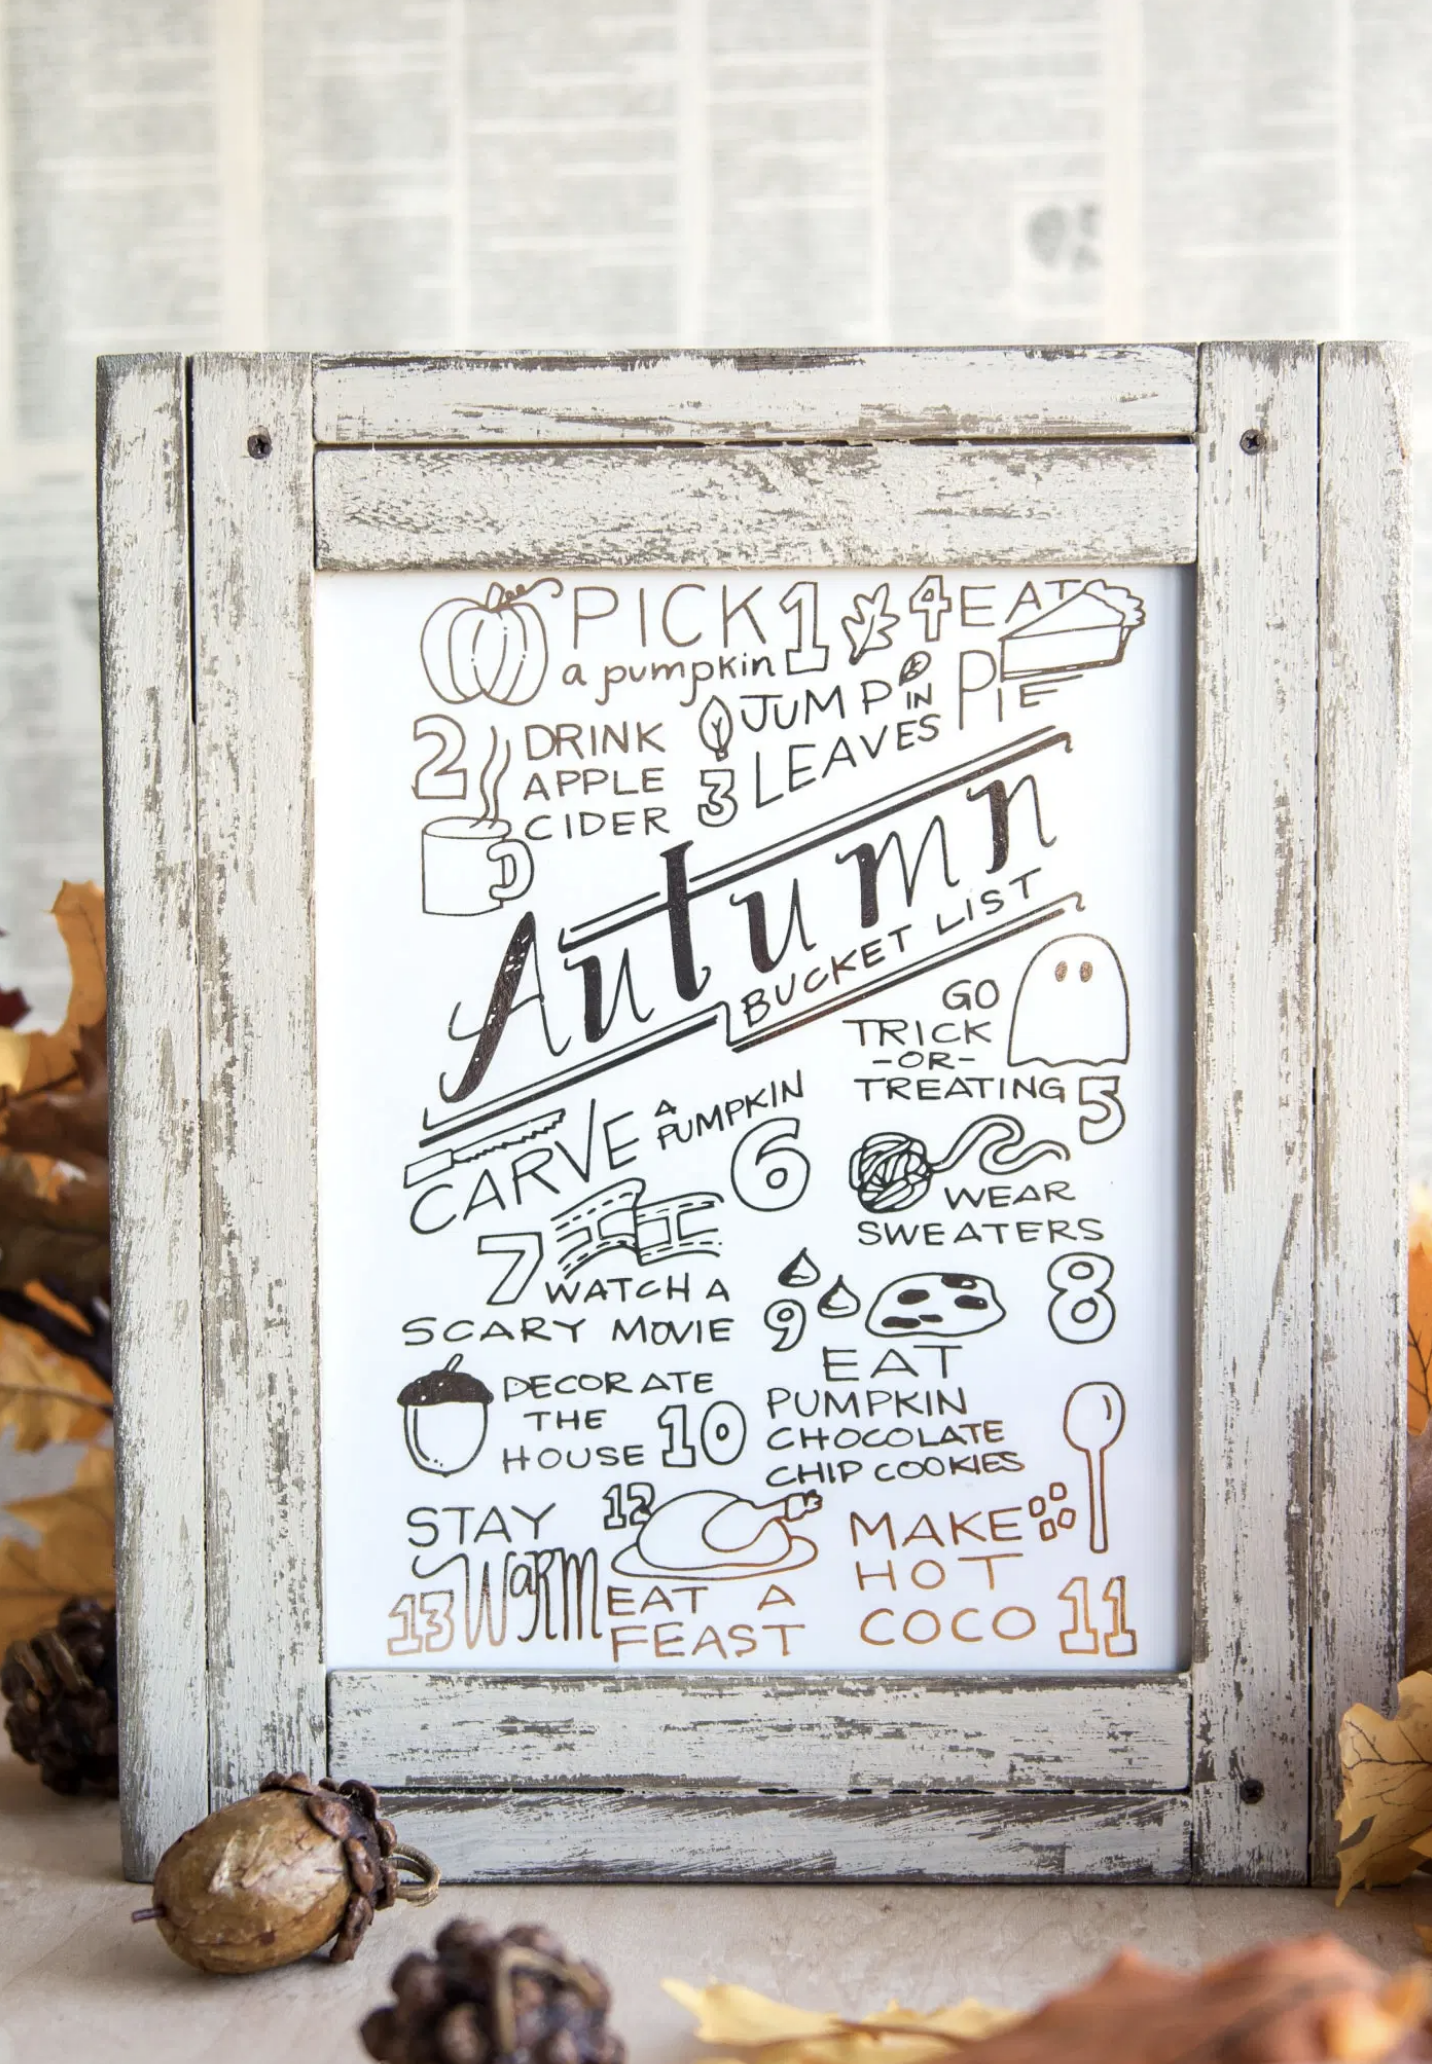 Beautiful Autumn Free Printables to Decorate Your Home on a Dime